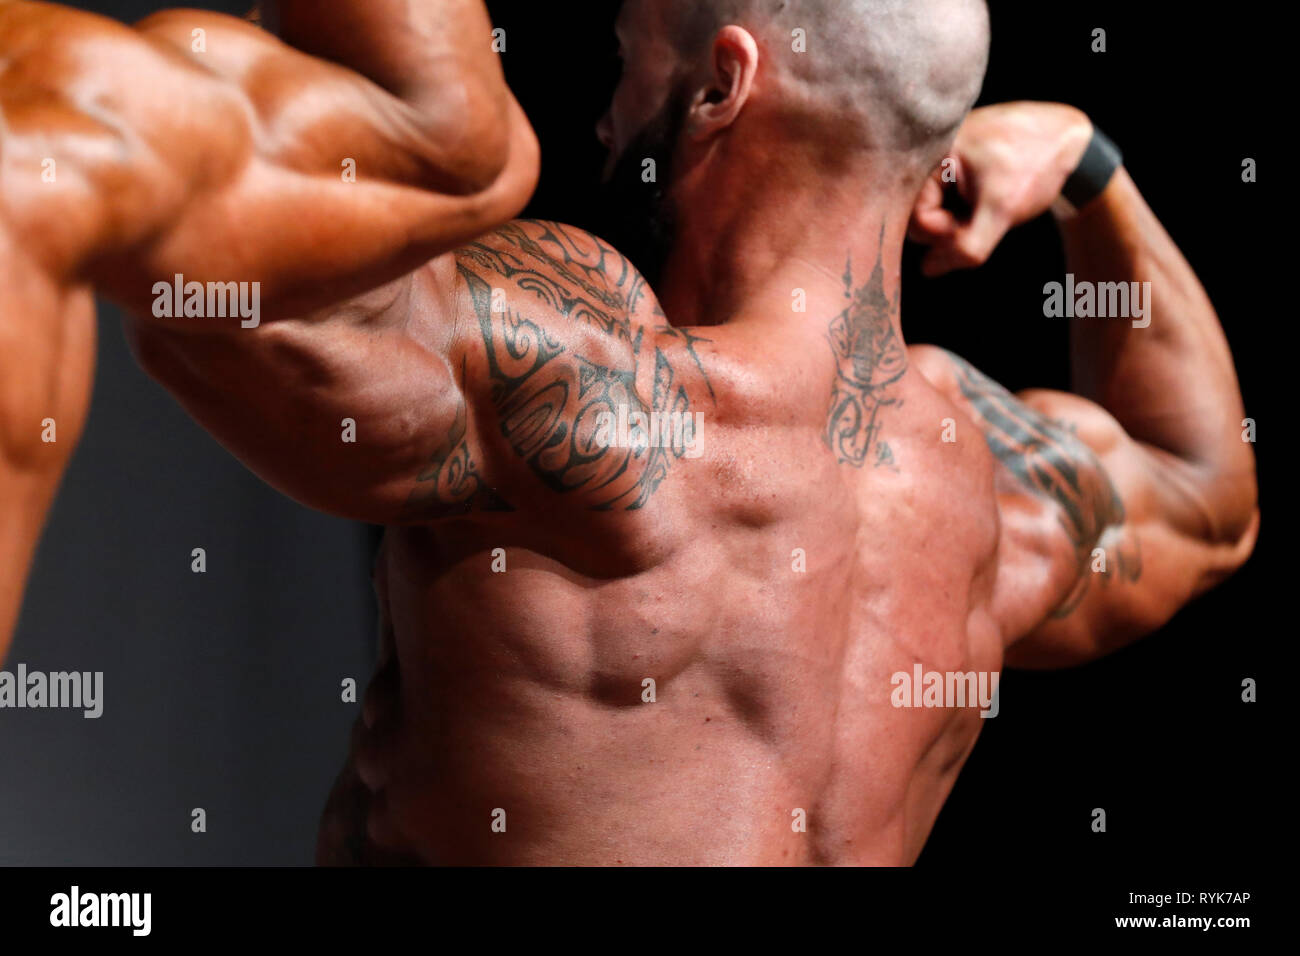 Contestants in a fitness and bodybuilding championship.   France. Stock Photo